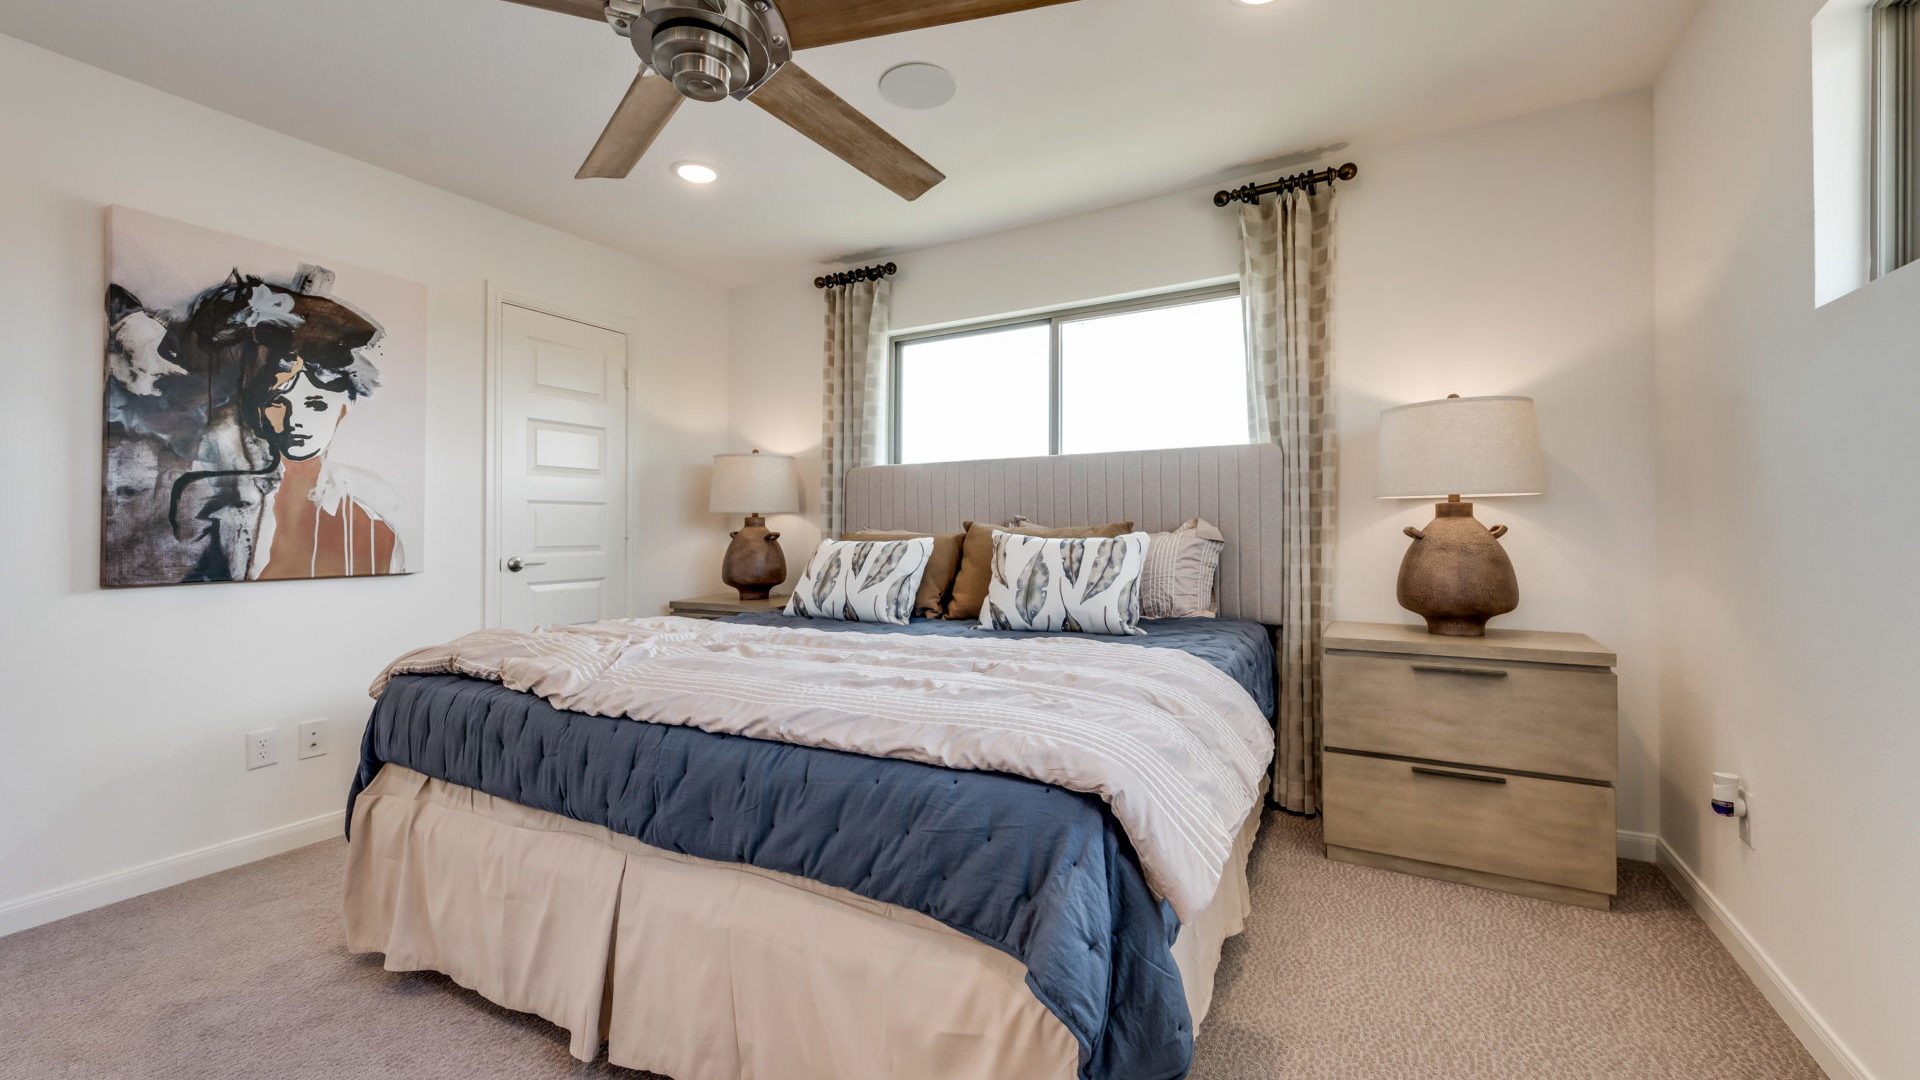 Lake Park Villas - New Phase Now Selling! new homes in Wylie, TX